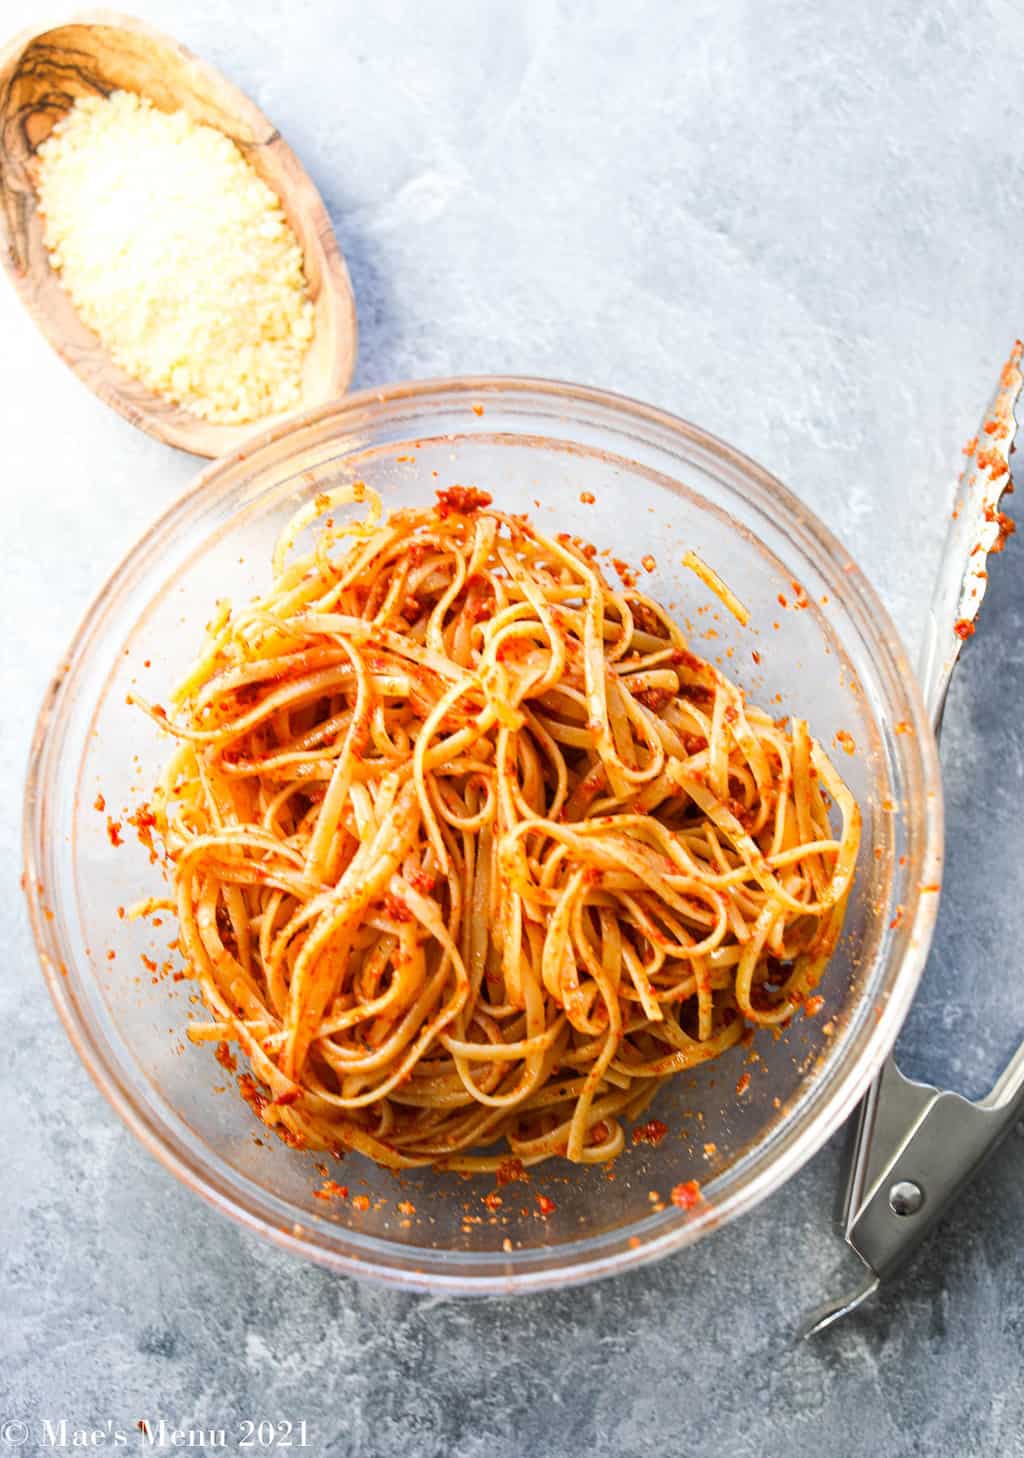 Pasta tossed with red pesto in a class mixing bowl